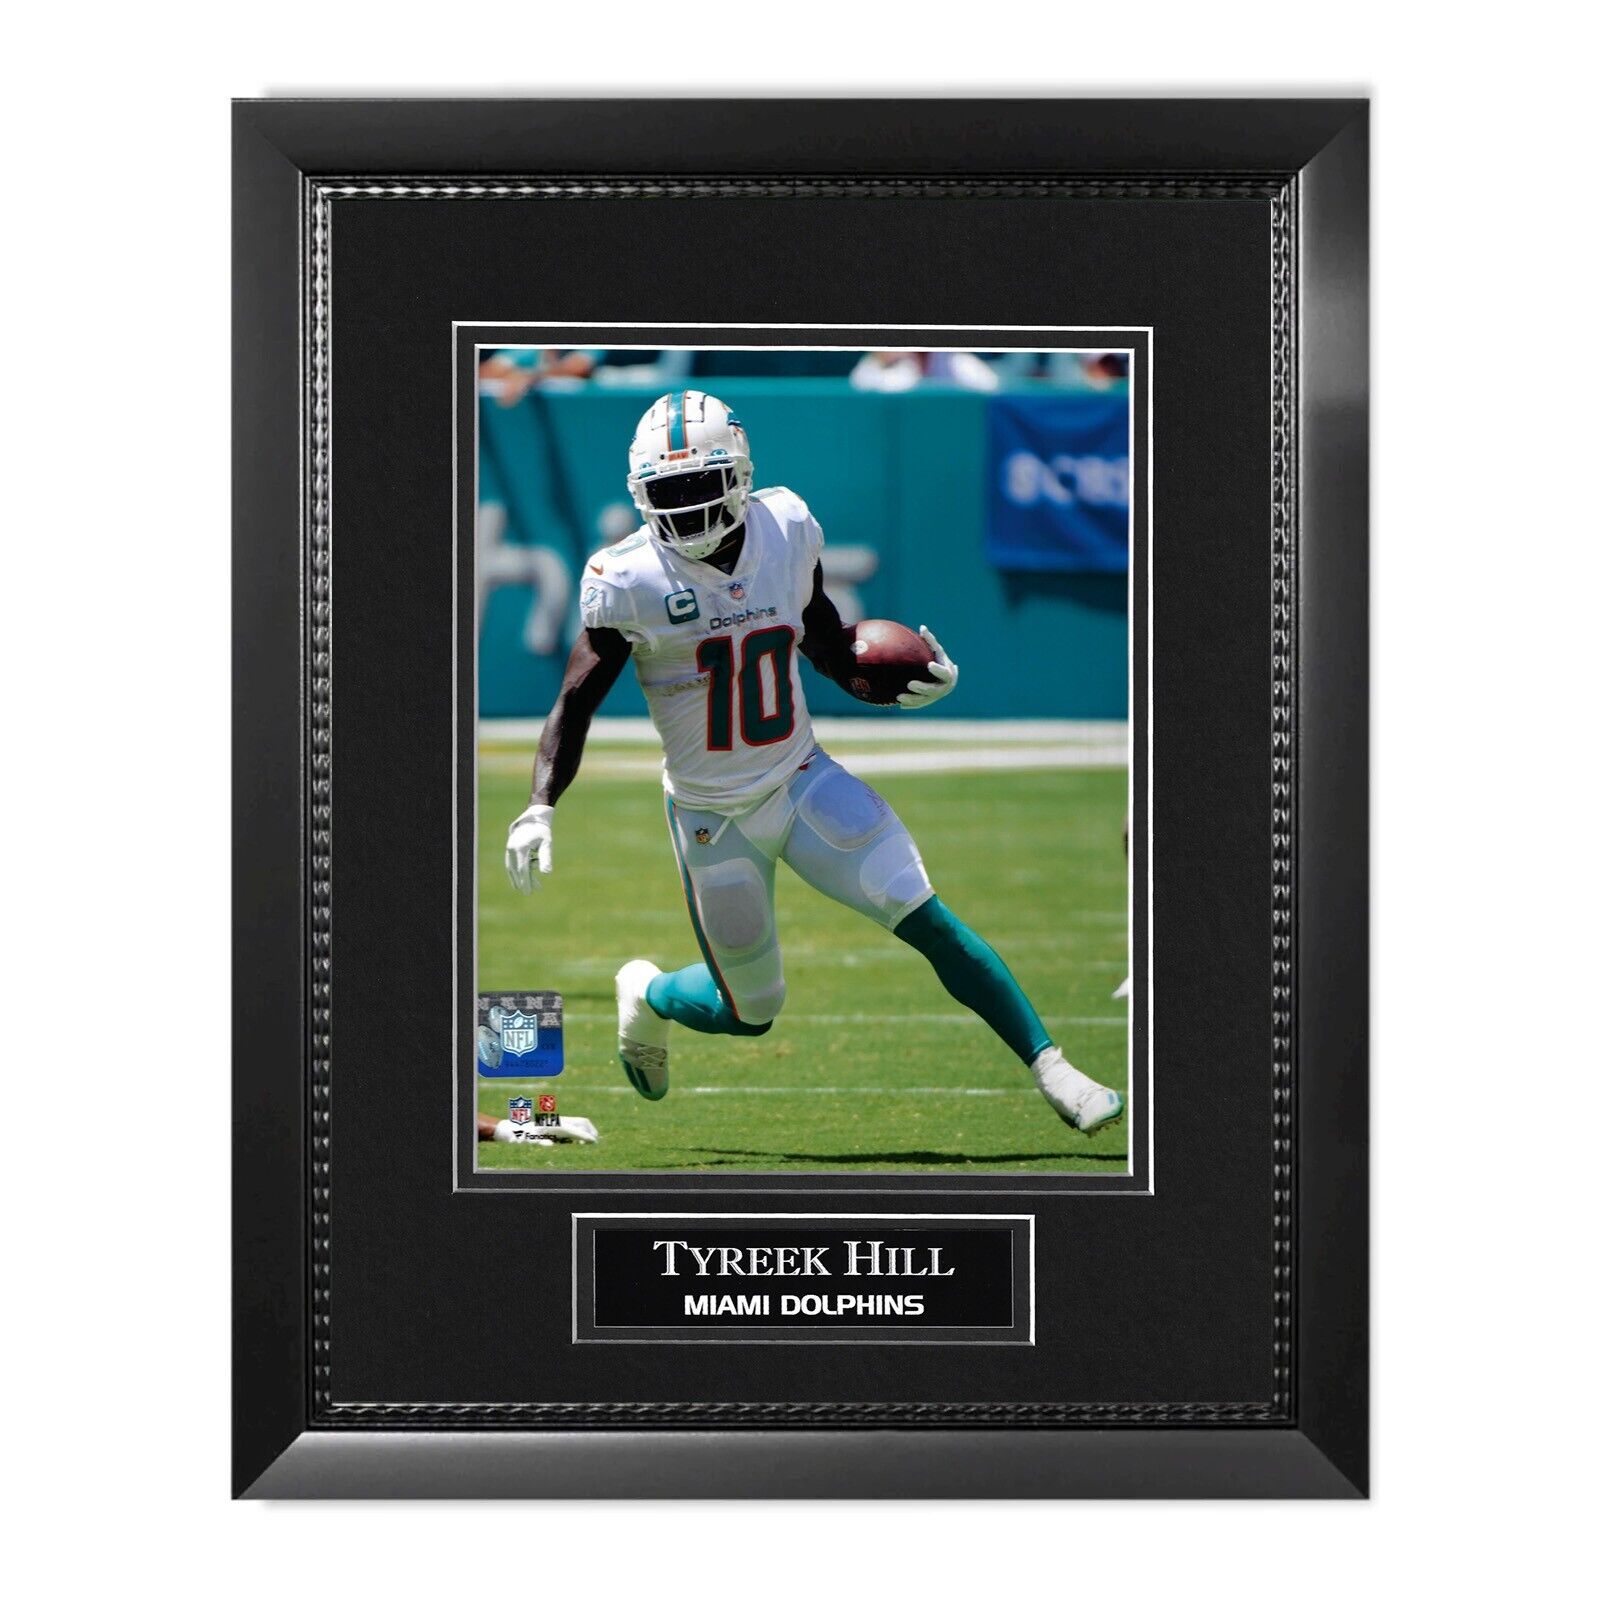 Tyreek Hill Unsigned Photograph Framed to 11x14